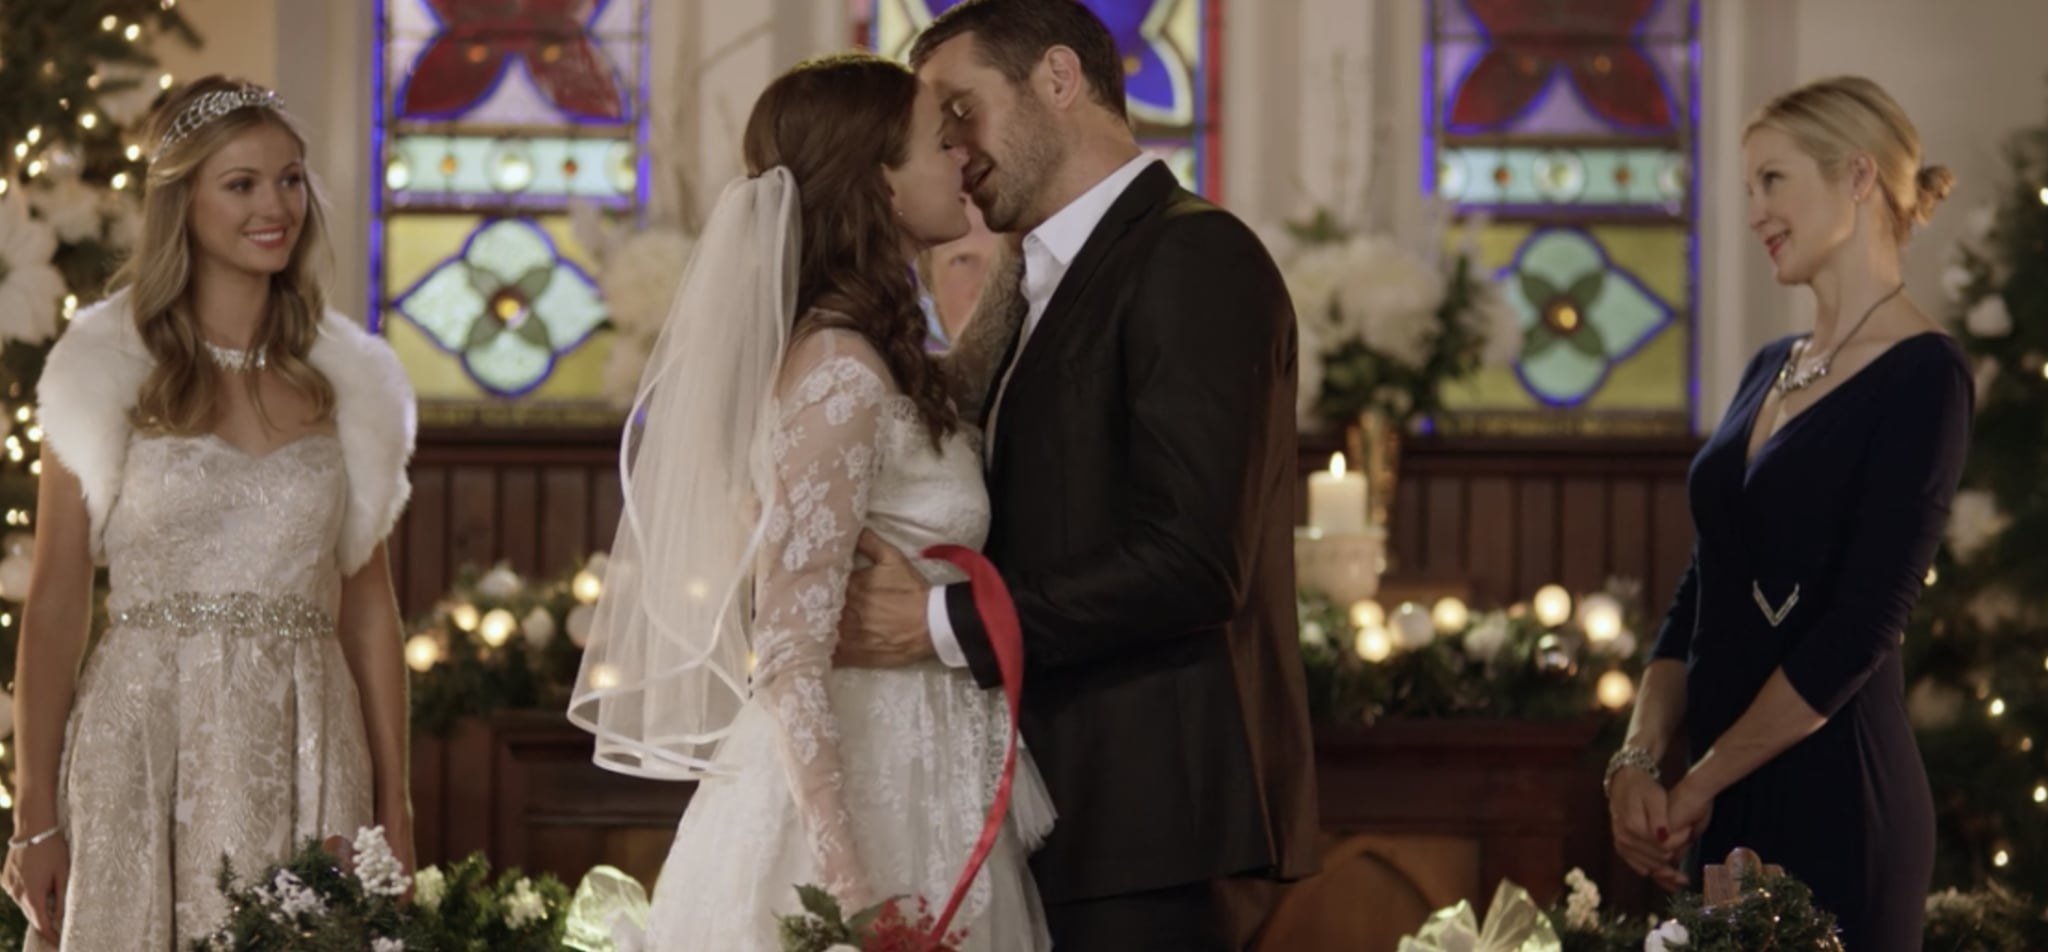 A couple stand in wedding clothes at an altar in a church, kissing. They&#x27;re watched by another woman in a bridal dress and an older woman.